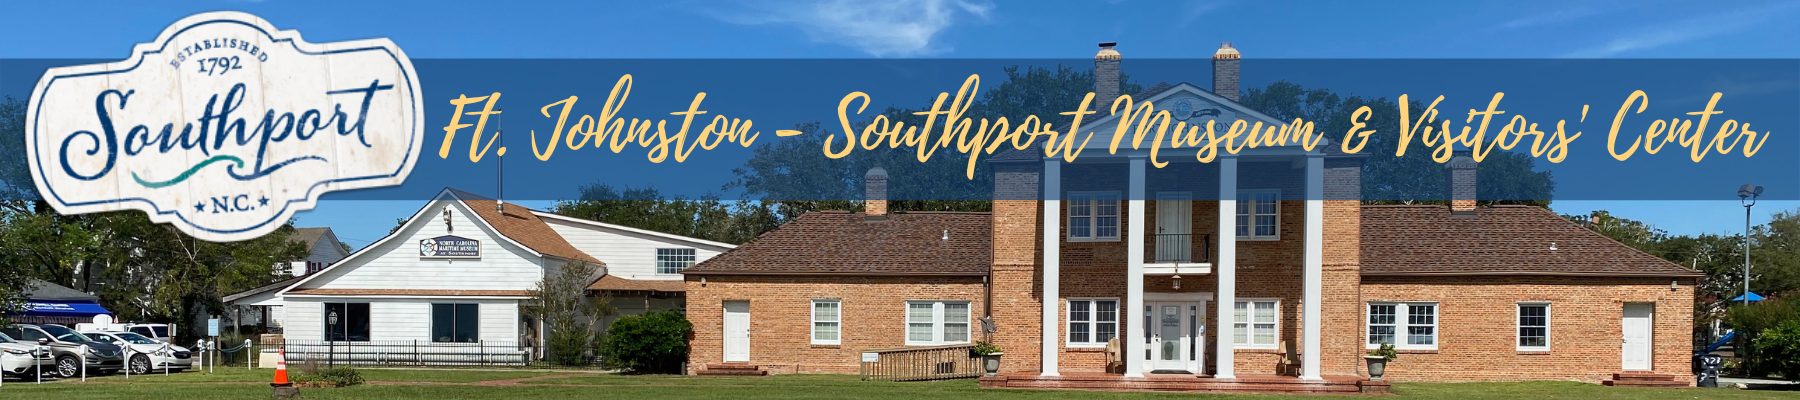 Southport Visitor Center